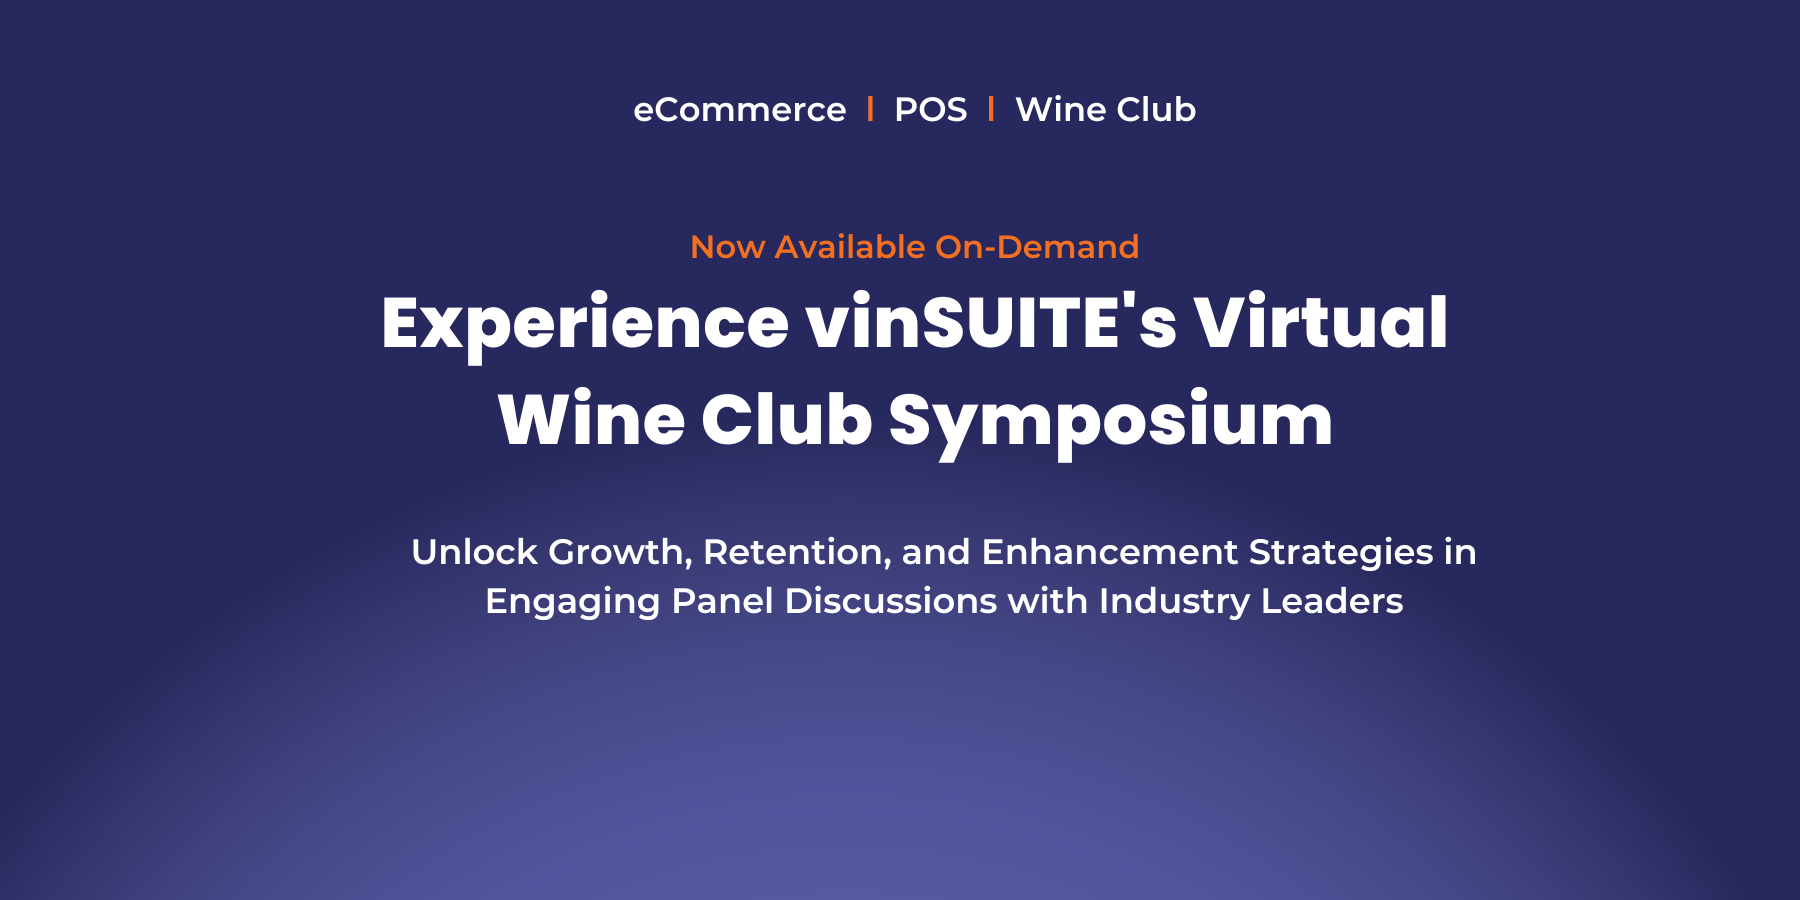 Now Available On-Demand - Experience vinSUITE's Virtual Wine Club Symposium - Unlock Growth, Retention, and Enhancement Strategies in Engaging Panel Discussions with Industry Leaders